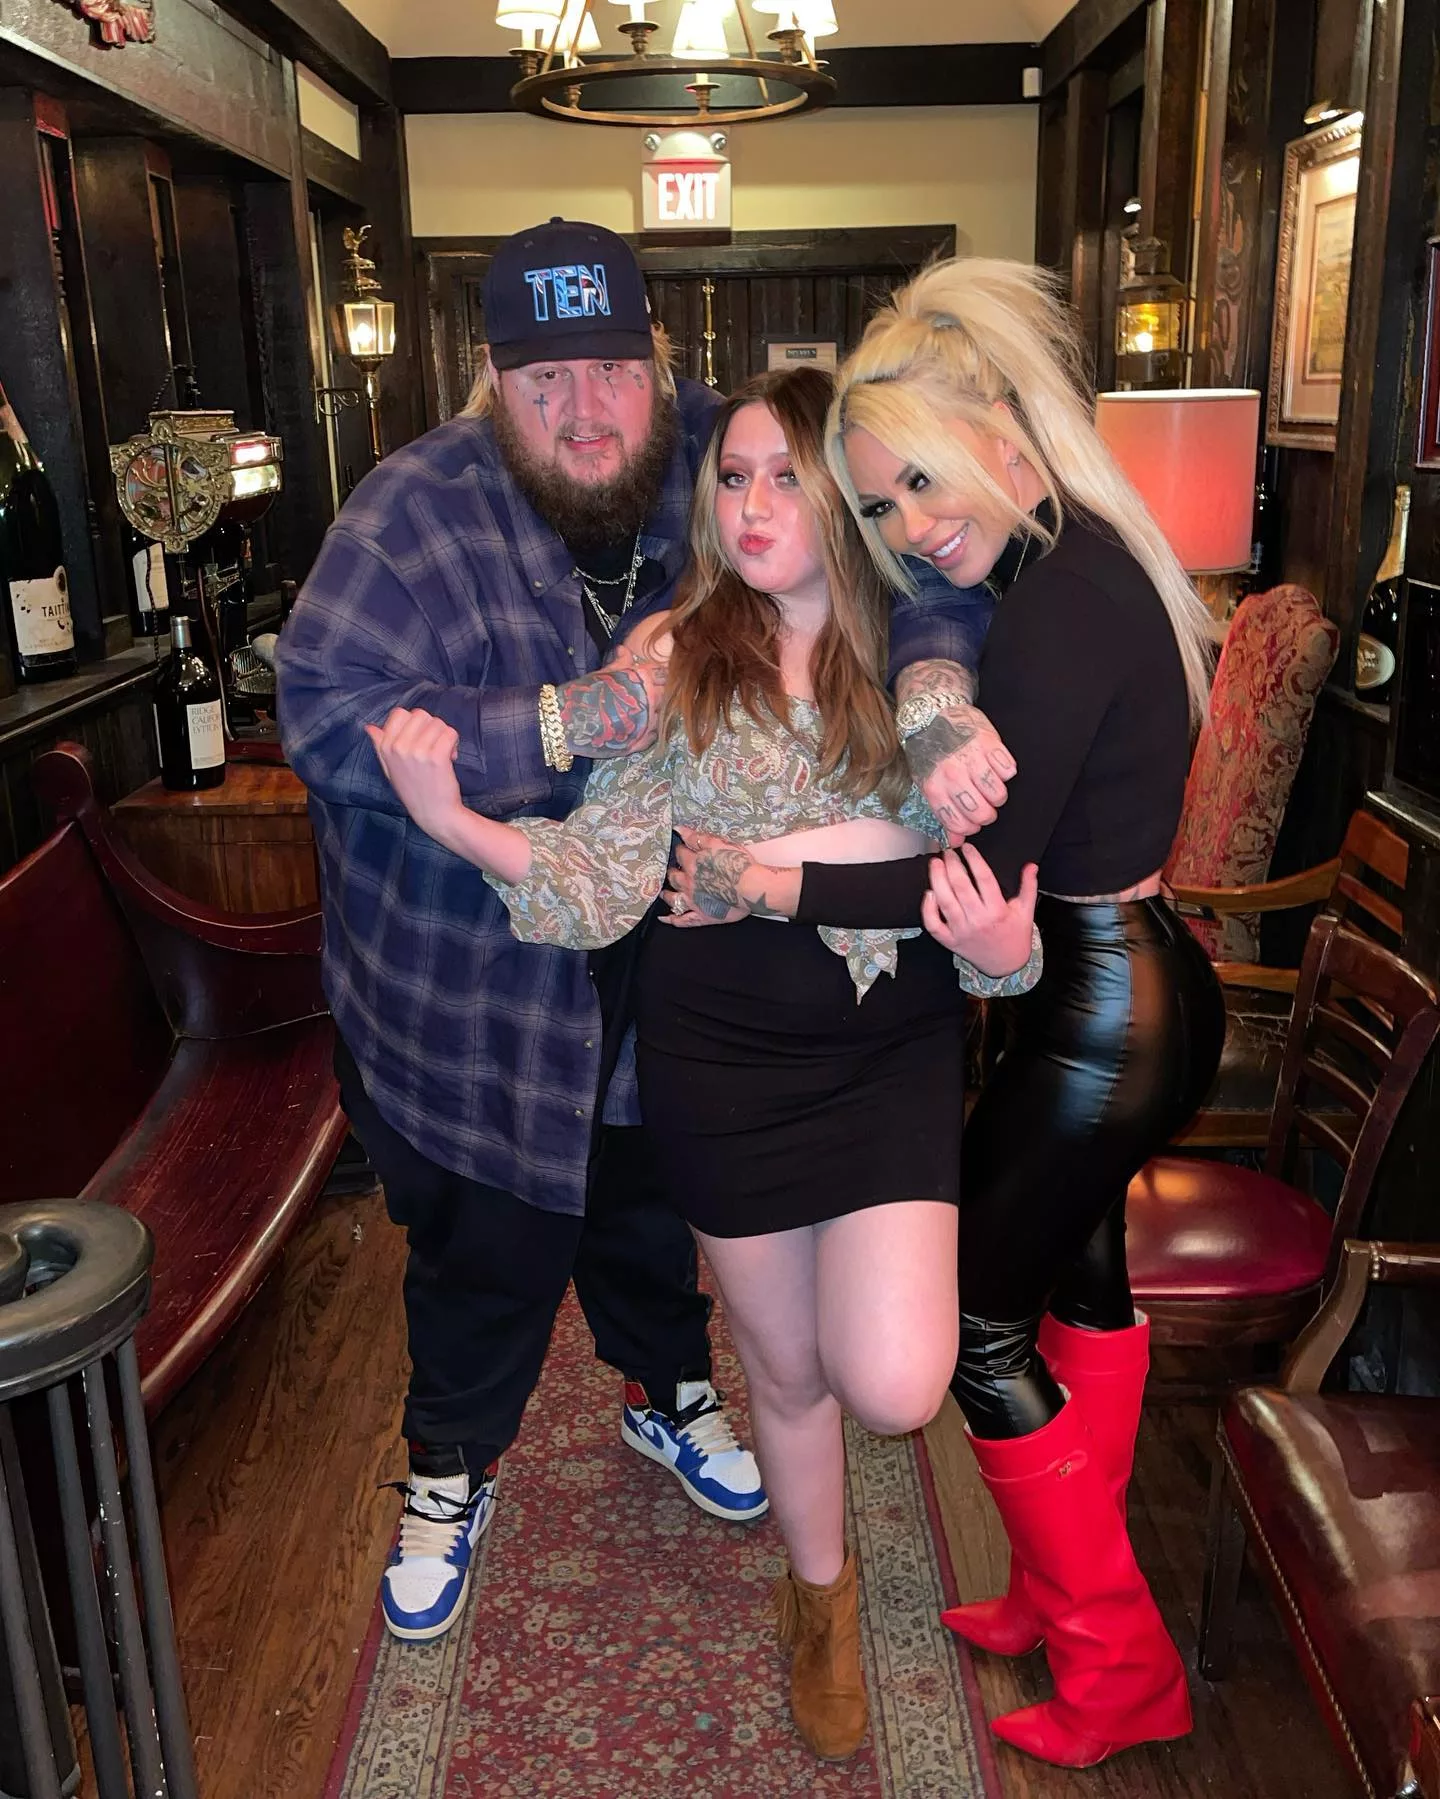 bunnie xo and jelly roll woth their daughter bunnie